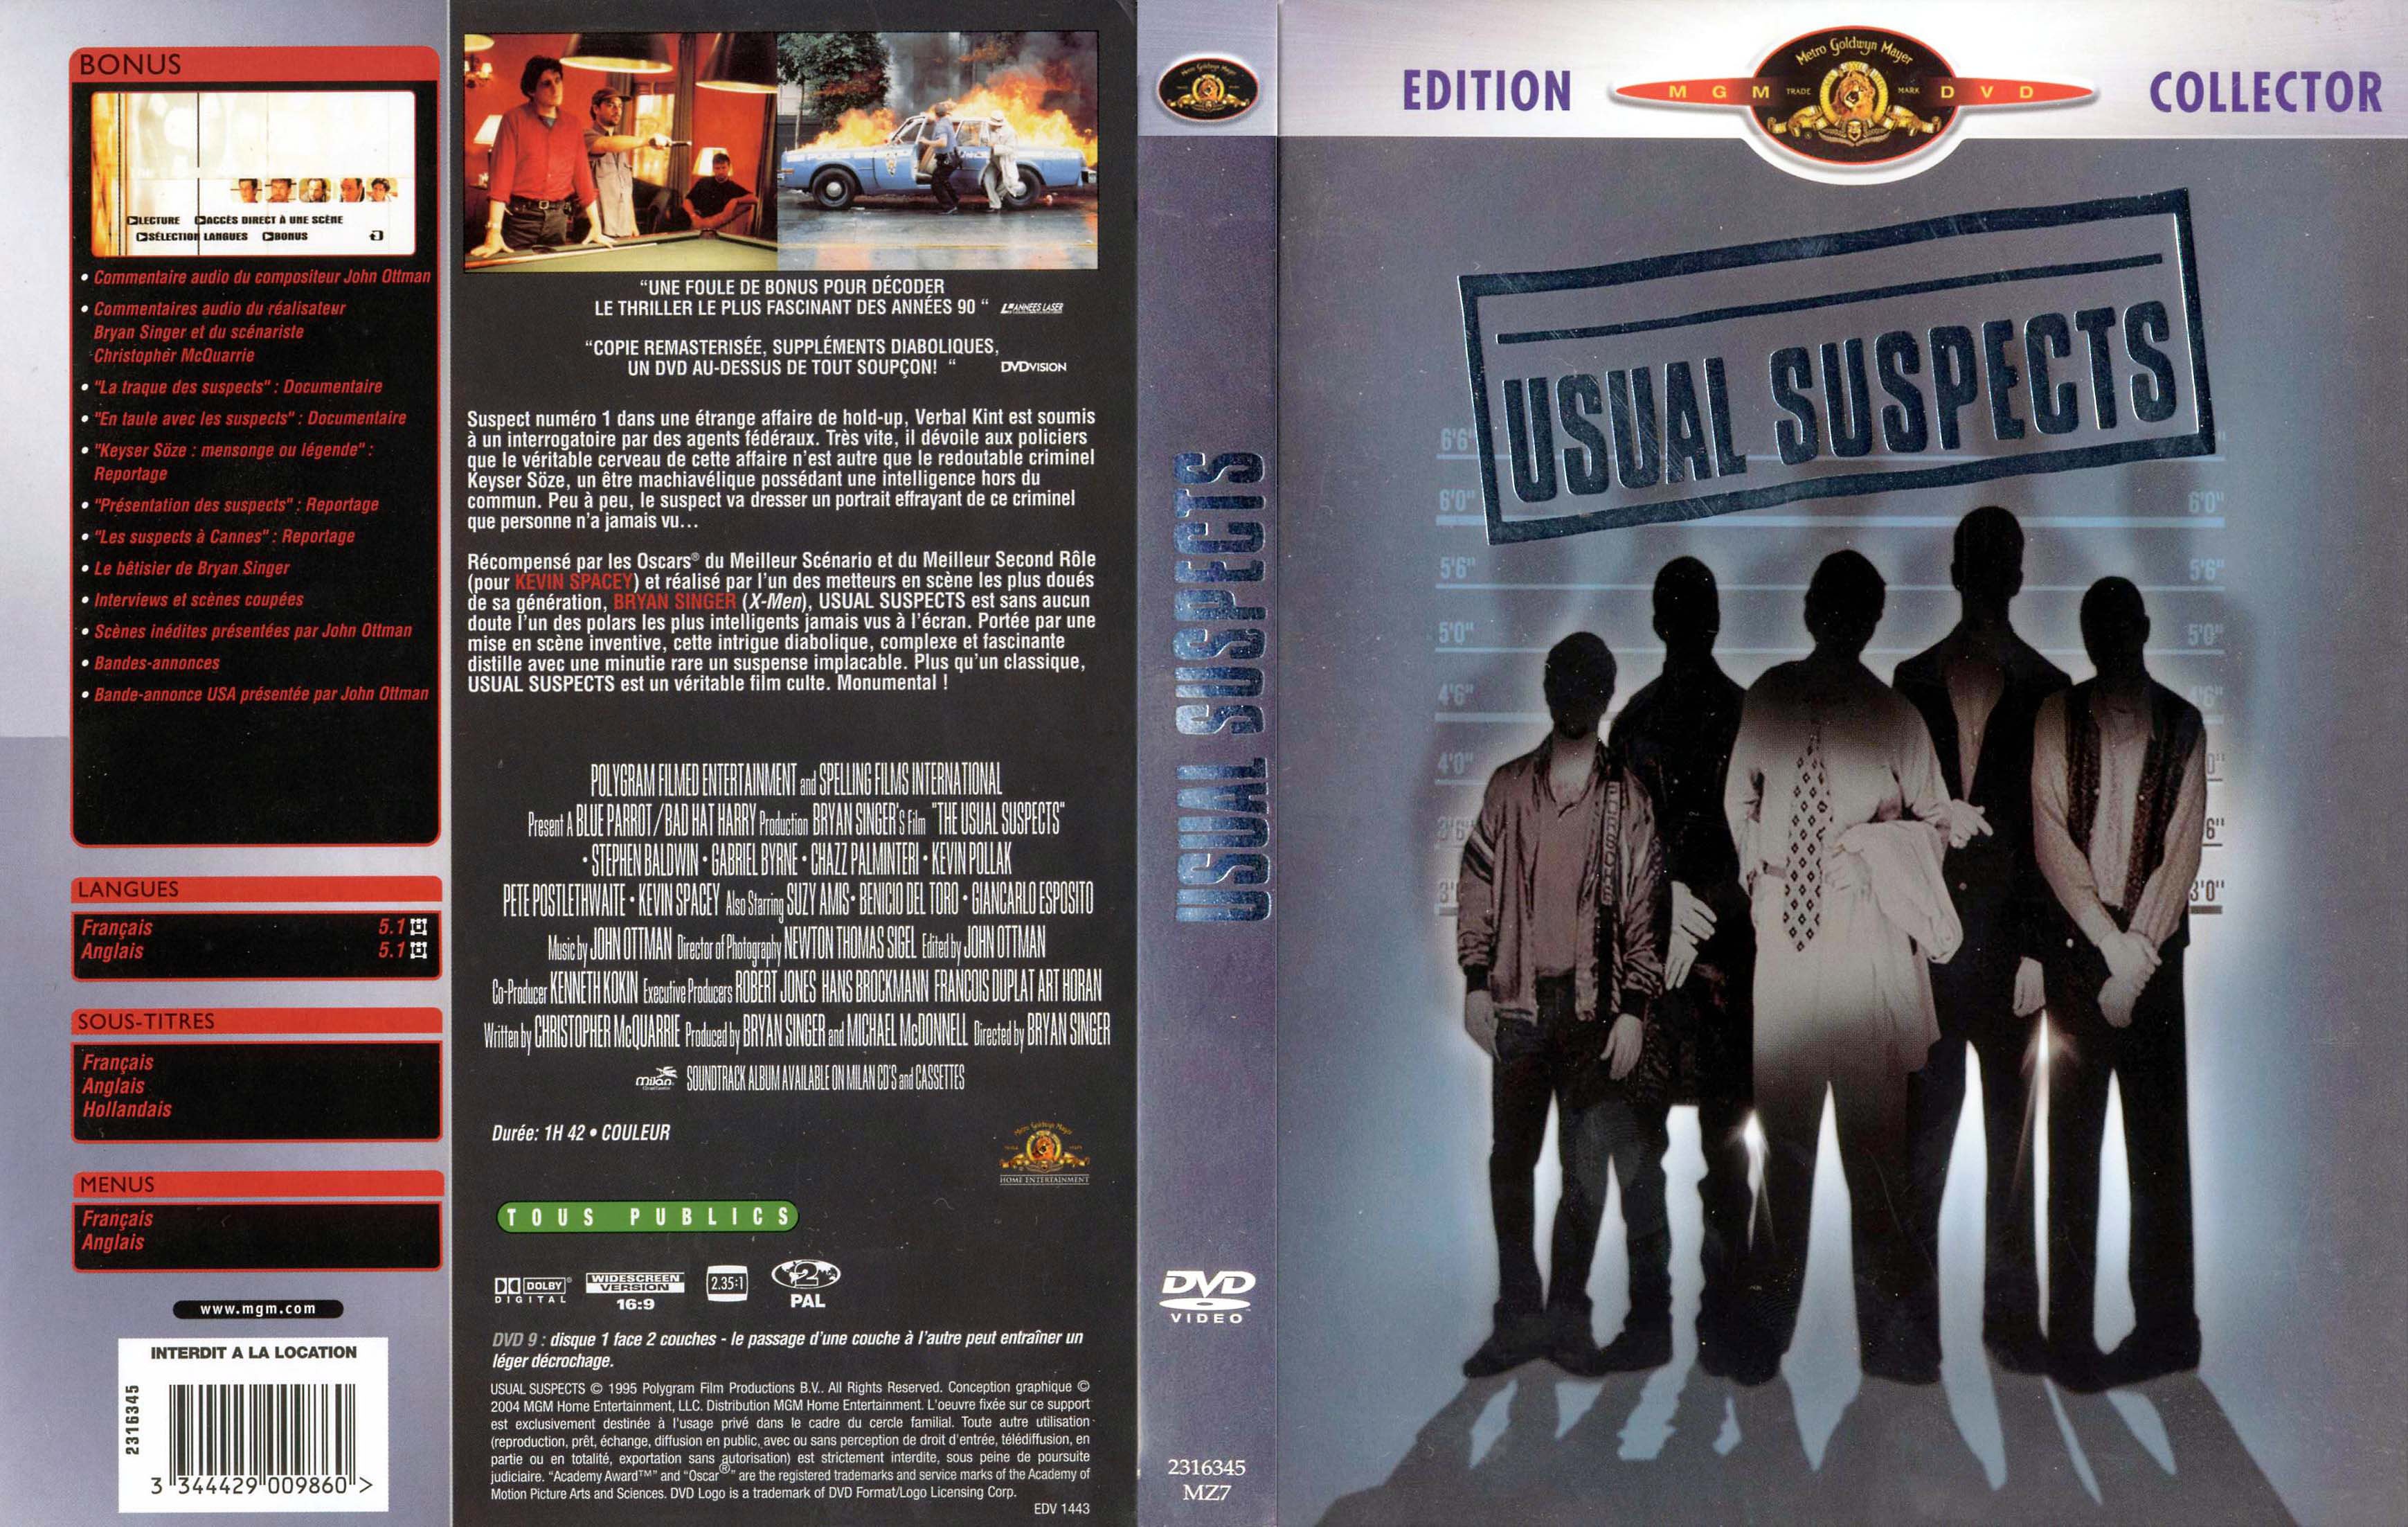 Jaquette DVD Usual suspects